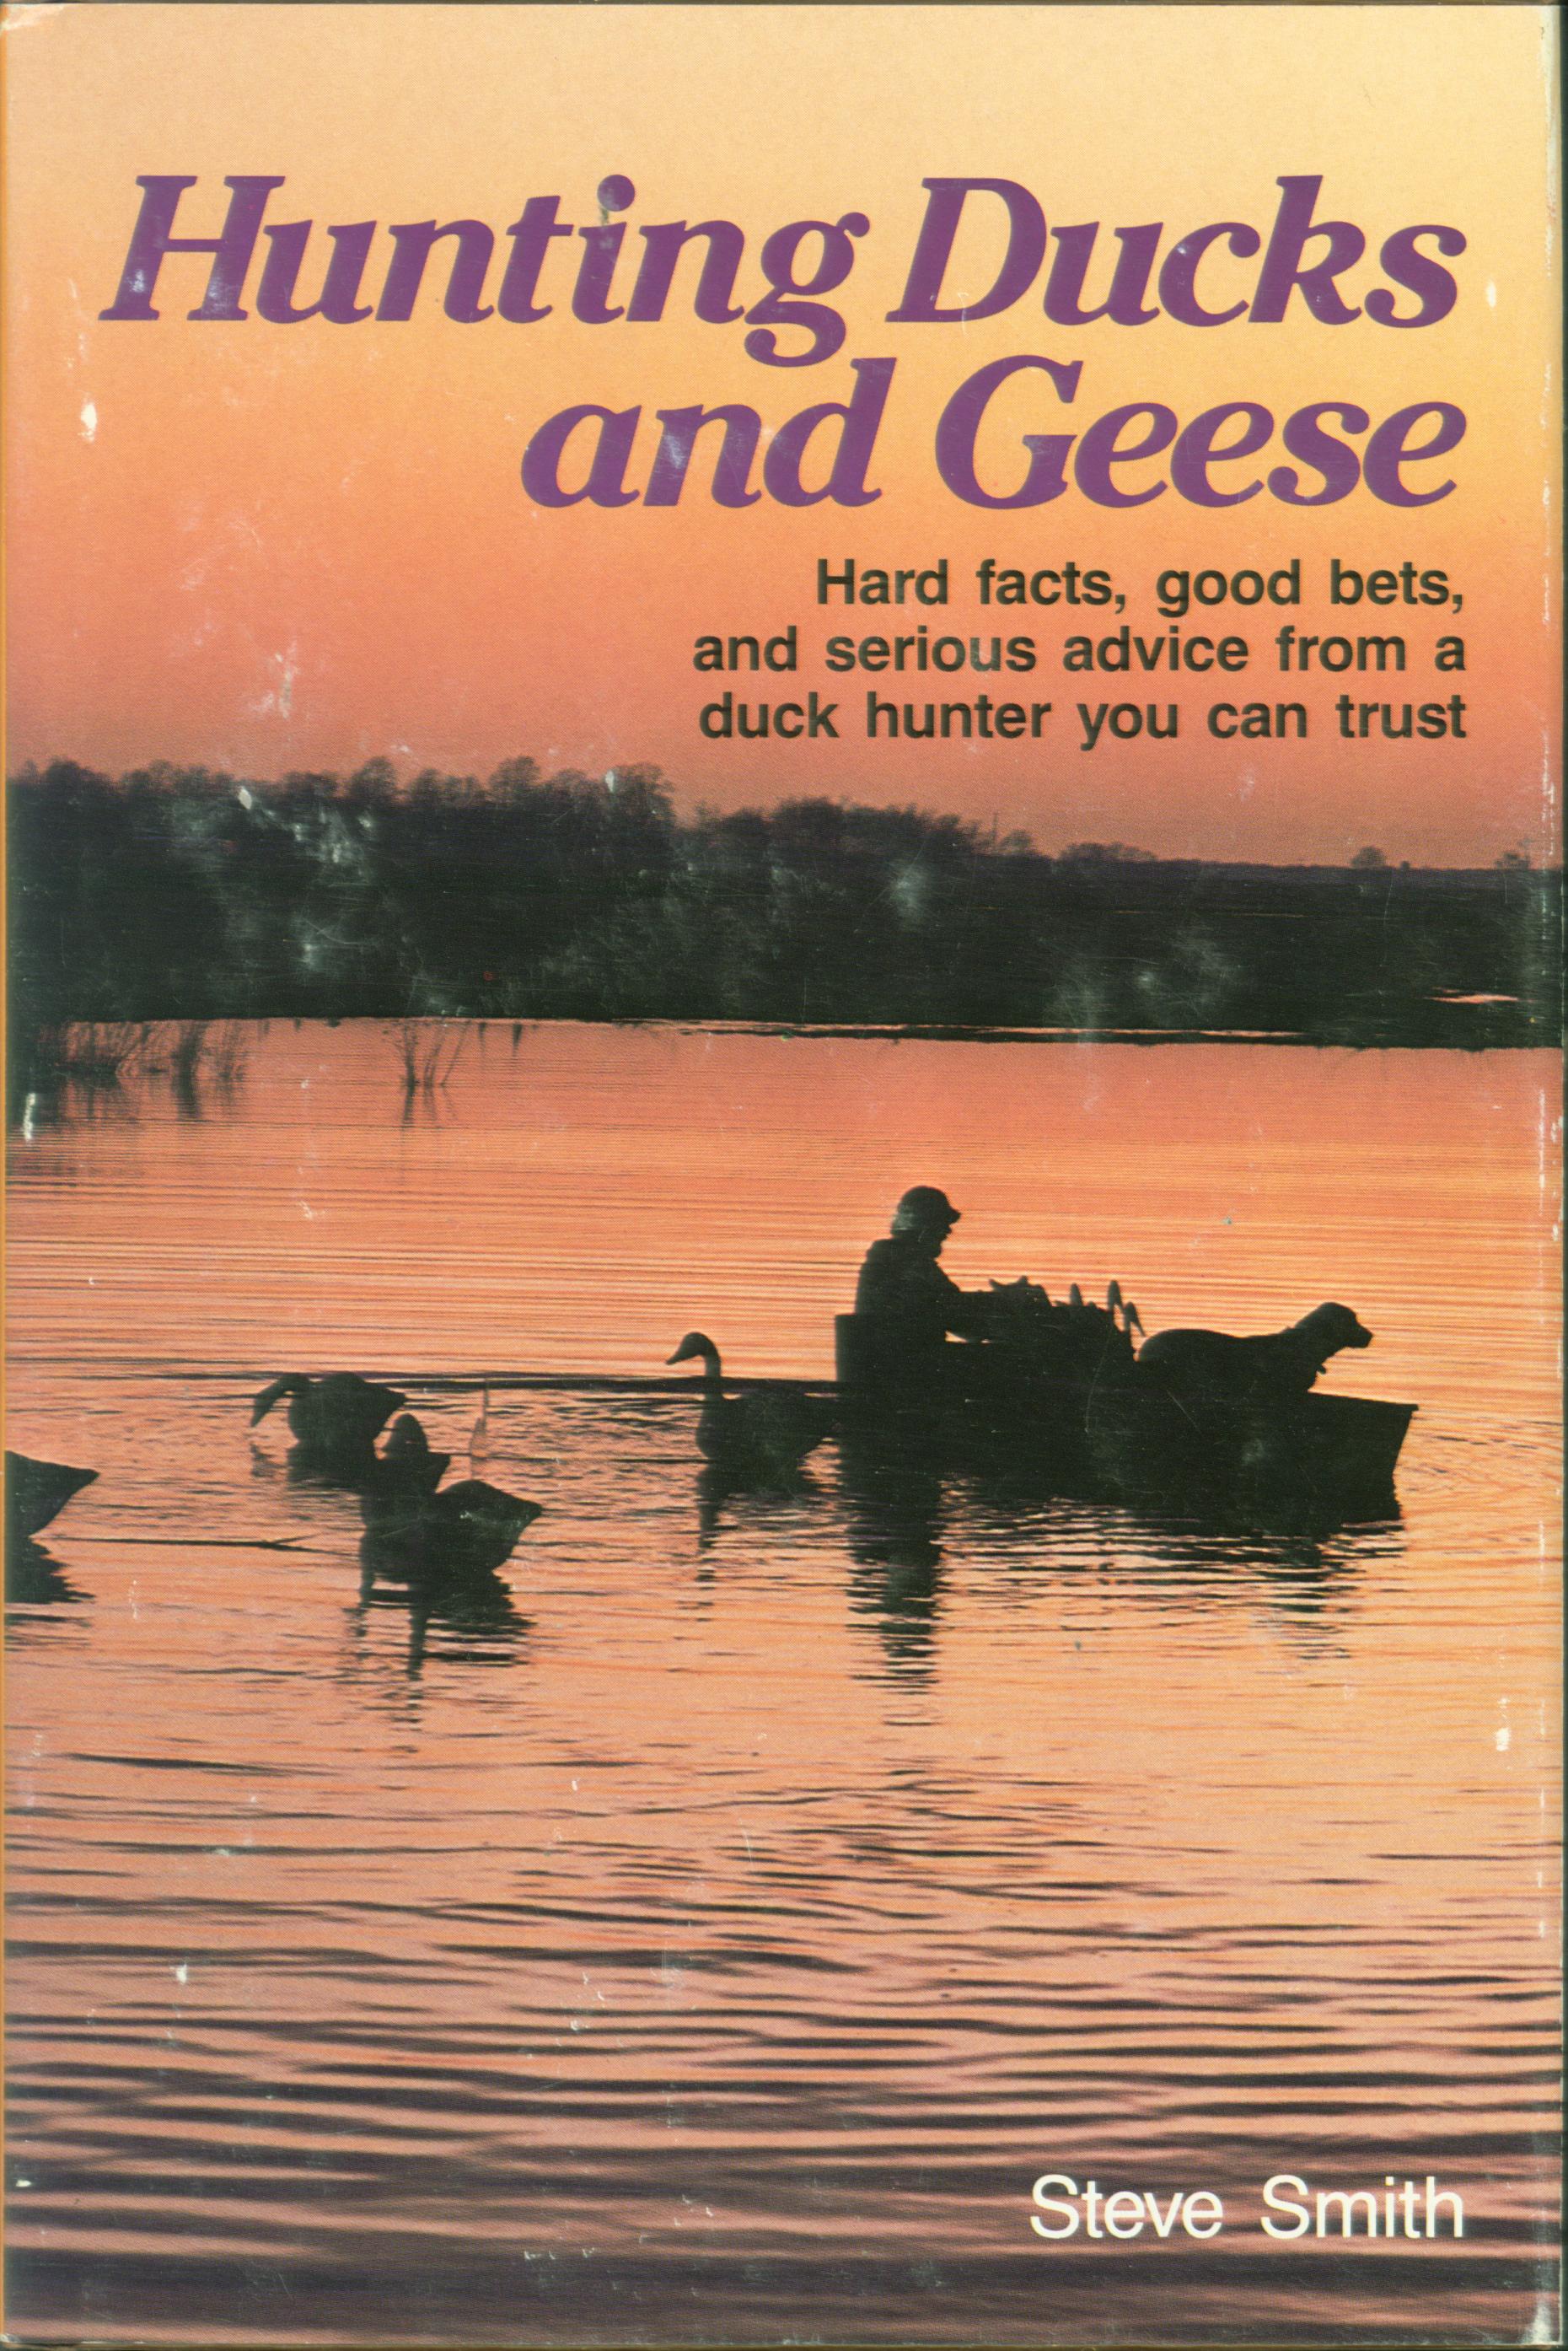 HUNTING DUCKS AND GEESE. 